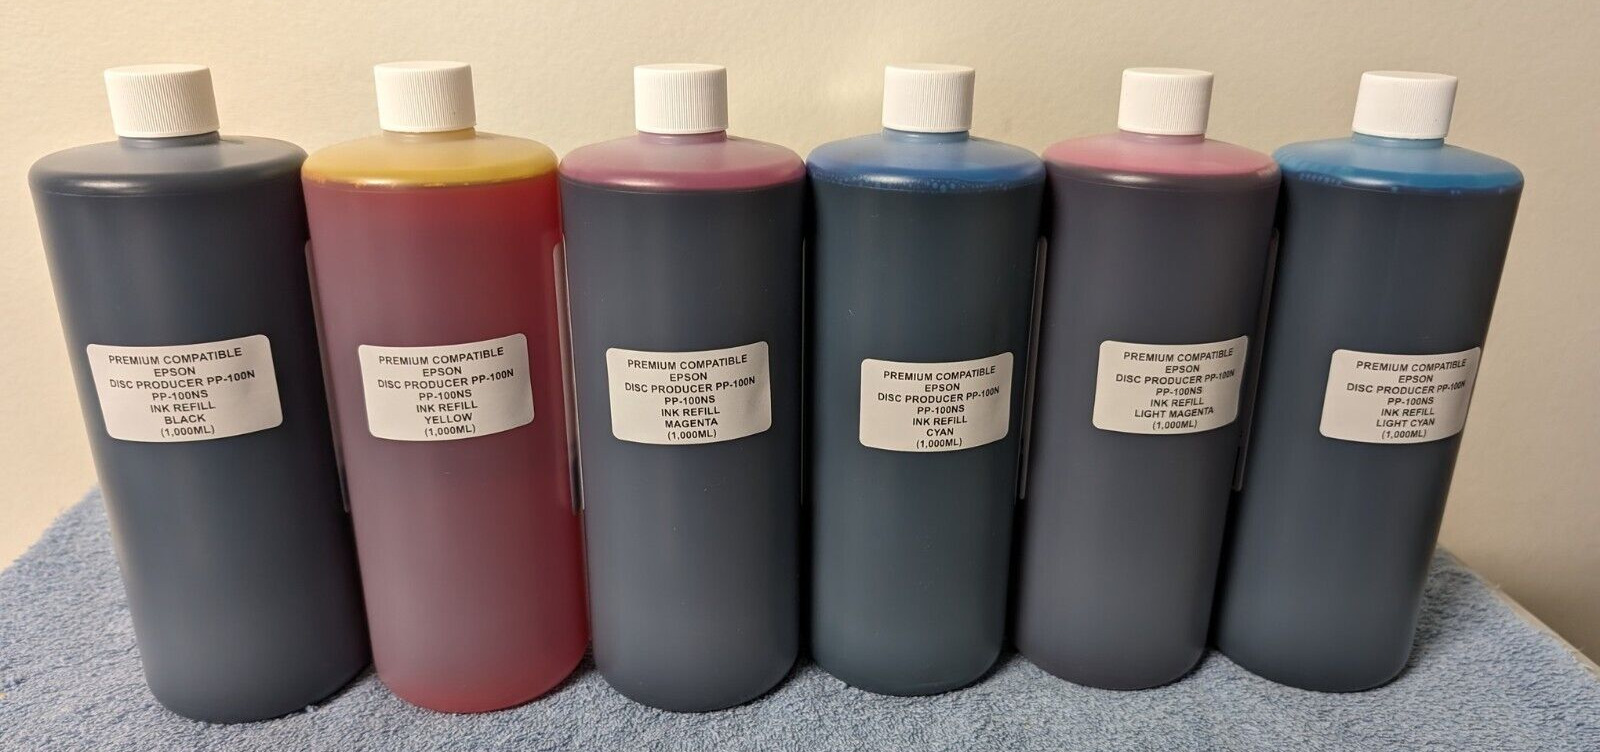 6 x EPSON DISC PRODUCER PP-100N PP-100NS PREMIUM COMPATIBLE INK REFILL (6,000ML)